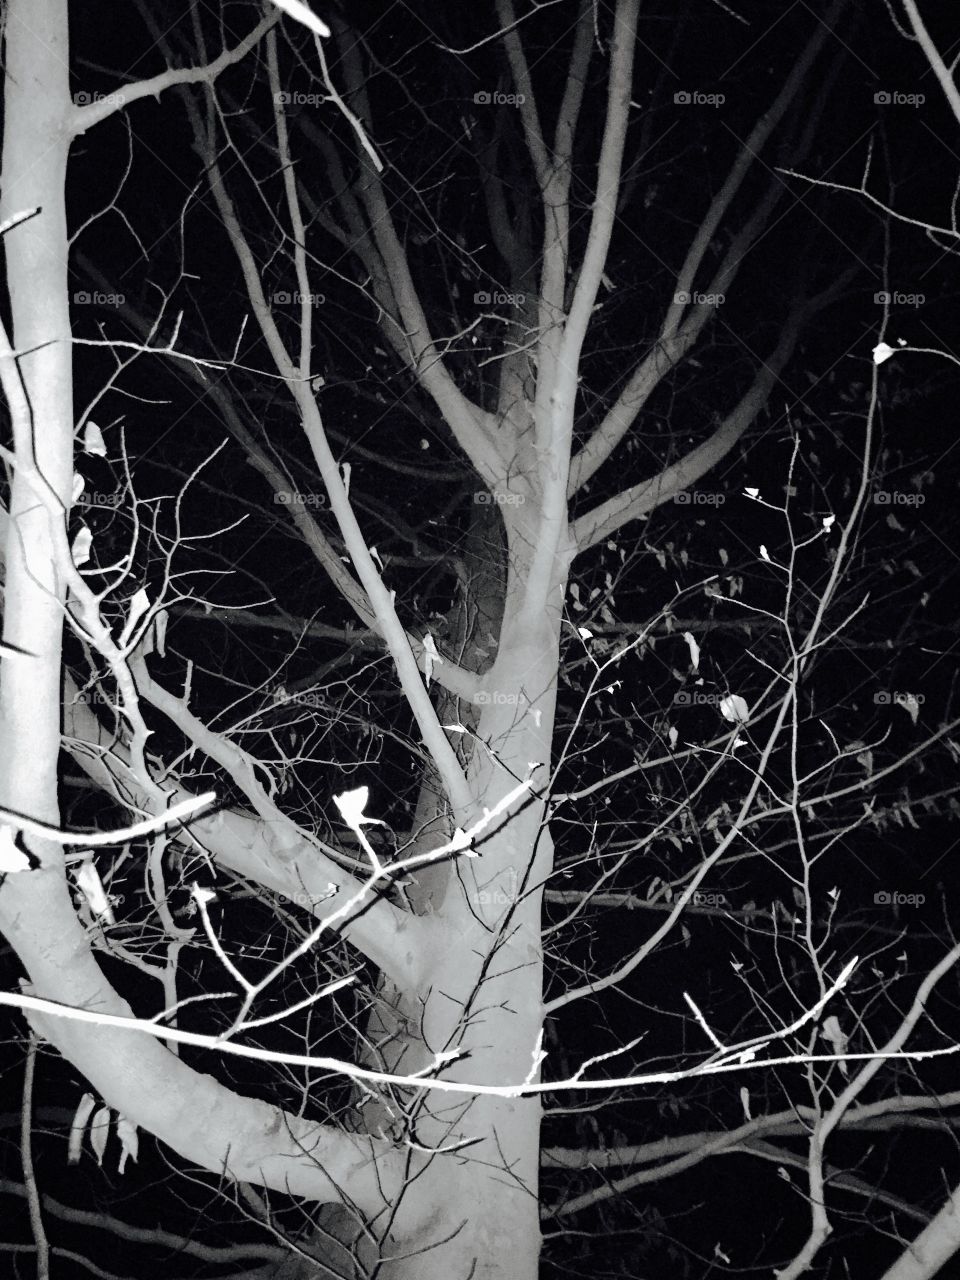 Silver White Tree Branches Raise Arms To The Black Evening Sky Like Ghosts In Winter Wood